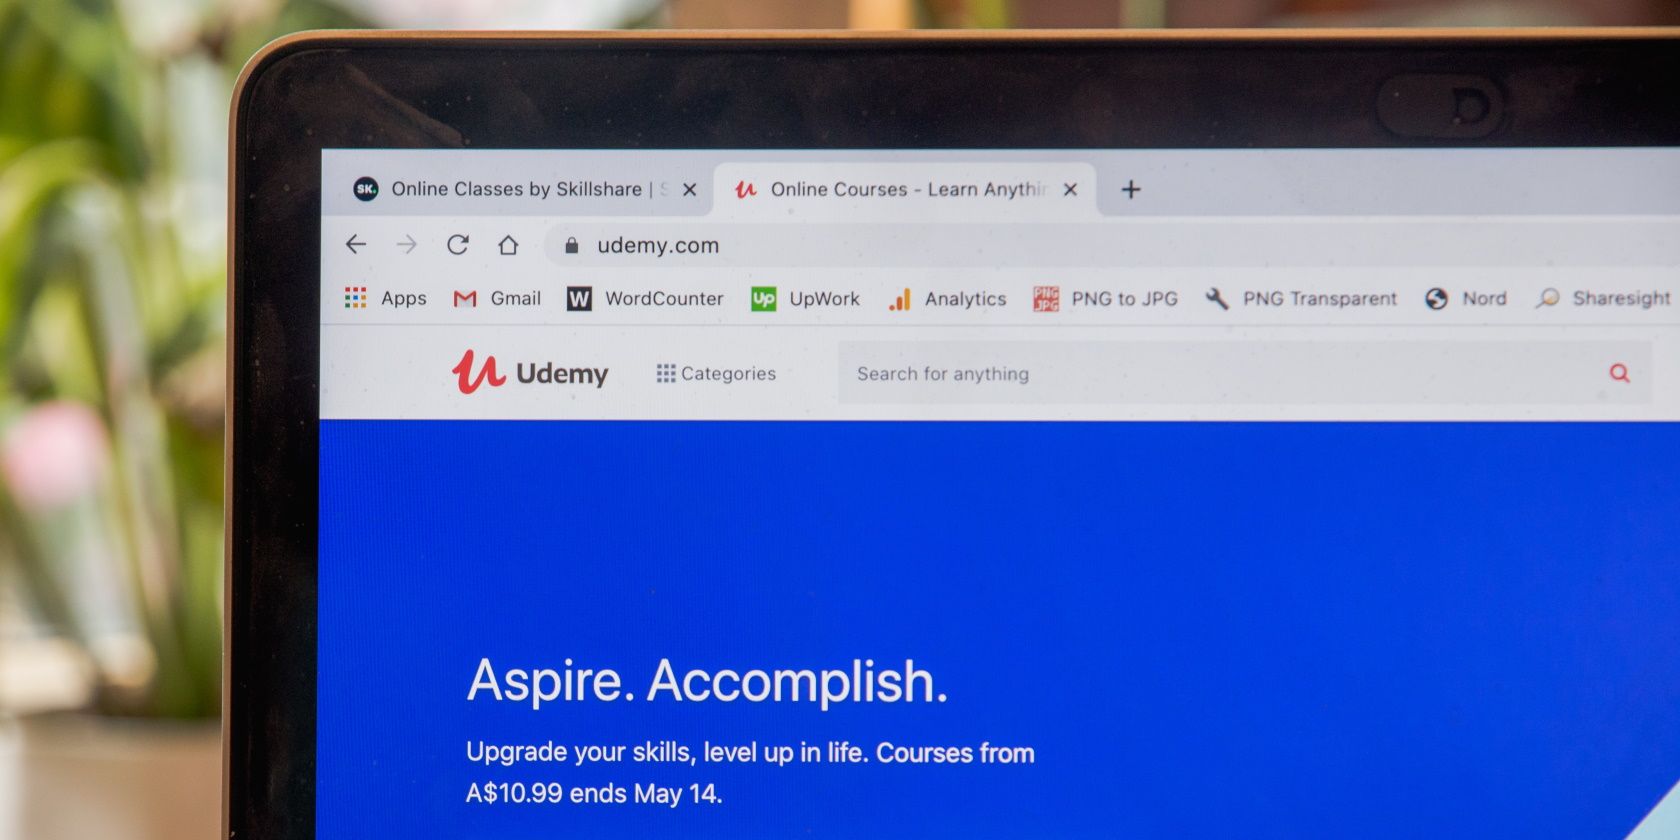 Close the laptop screen where the Udemy and Skillshare e-learning platform tabs are open.